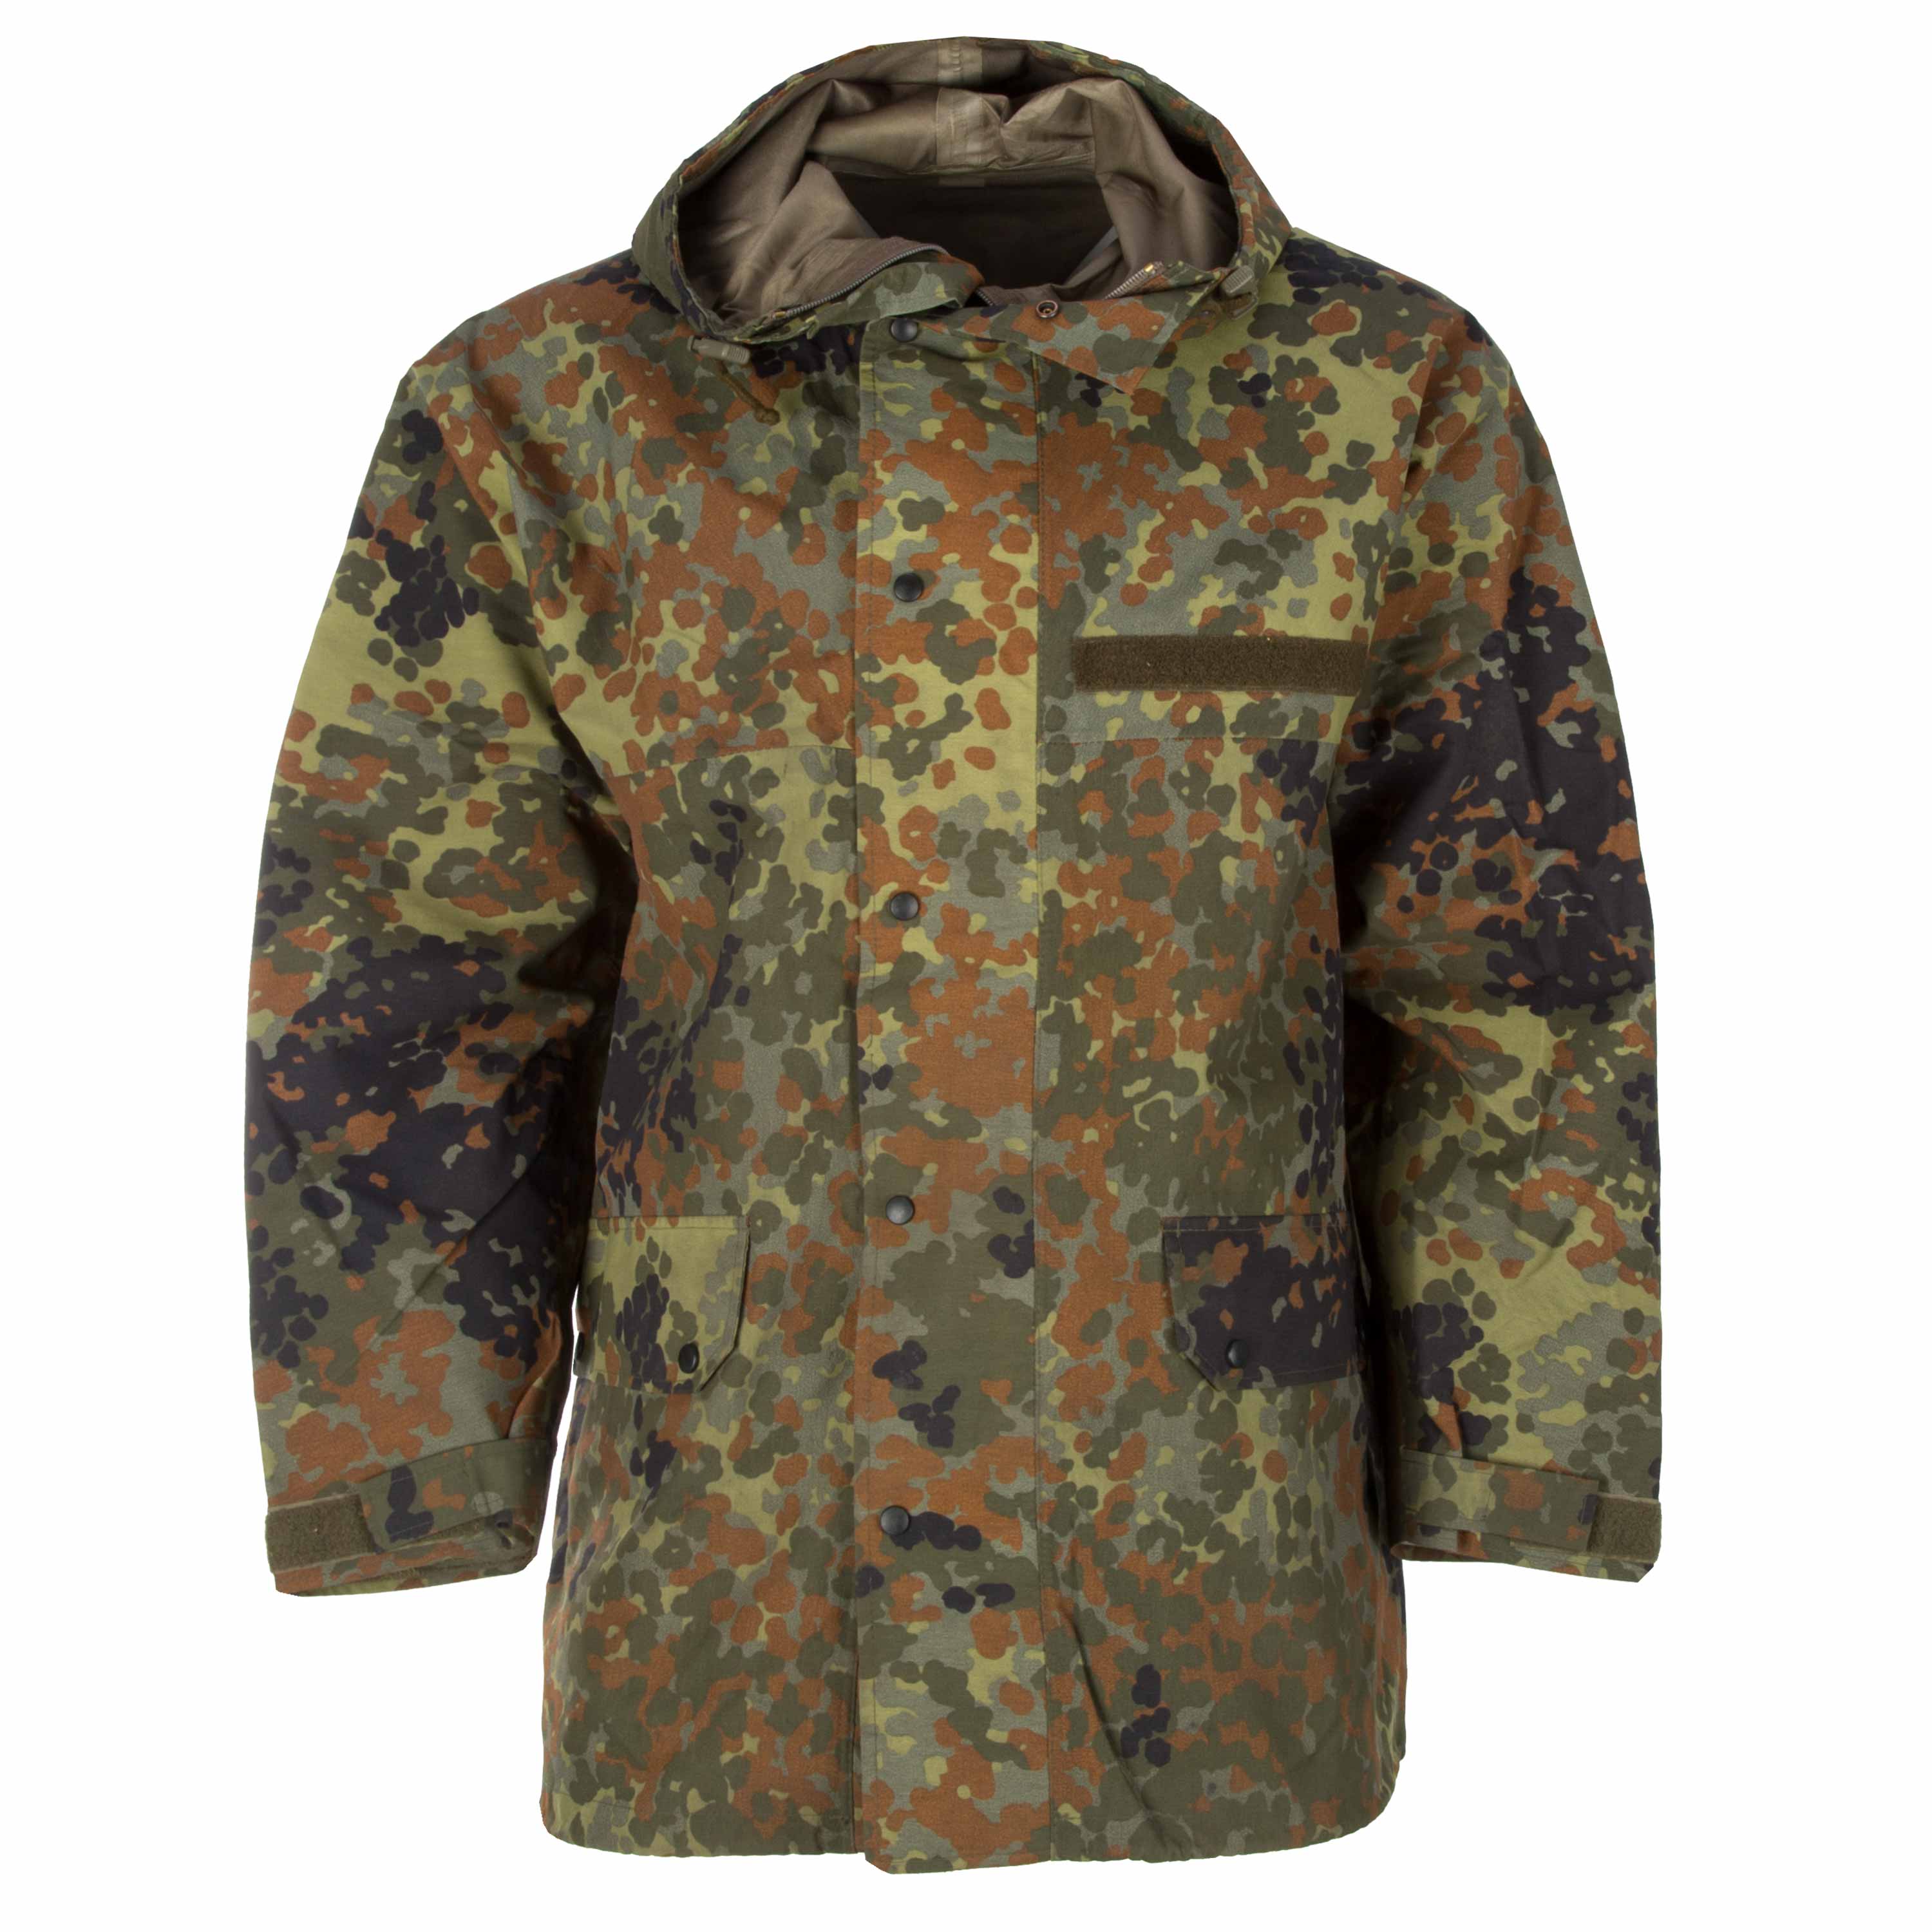 Purchase the German Army Wet Weather Suit flecktarn Used by ASMC